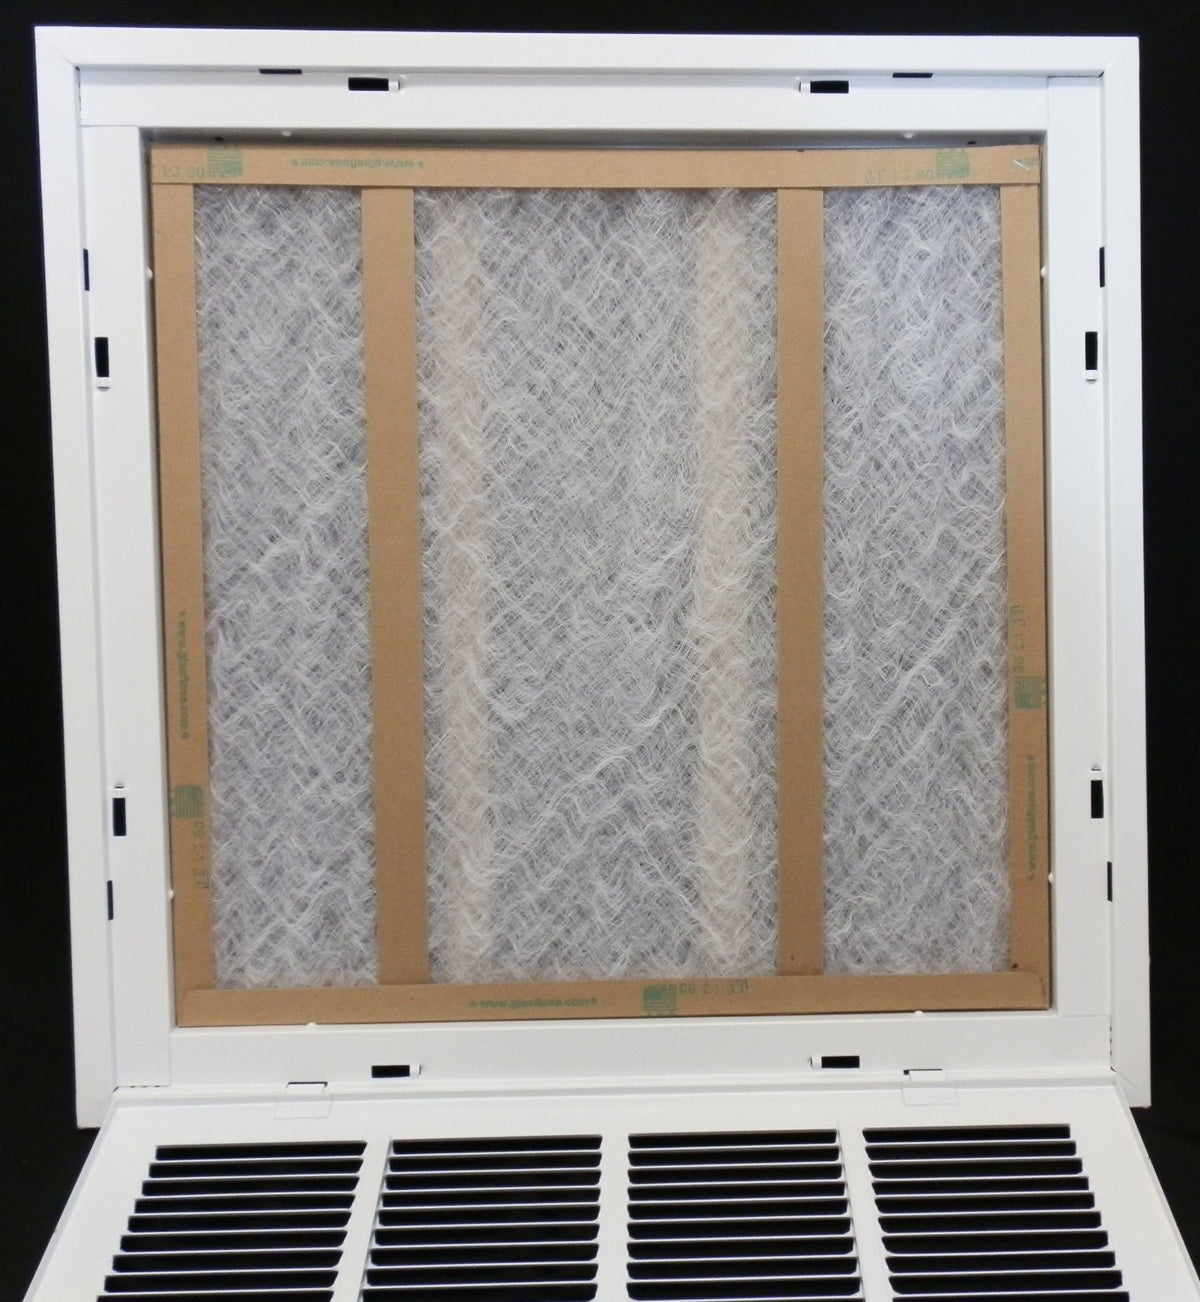 24&quot; X 20&quot; Steel Return Air Filter Grille for 1&quot; Filter - Removable Frame - [Outer Dimensions: 26 5/8&quot; X 22 5/8&quot;]